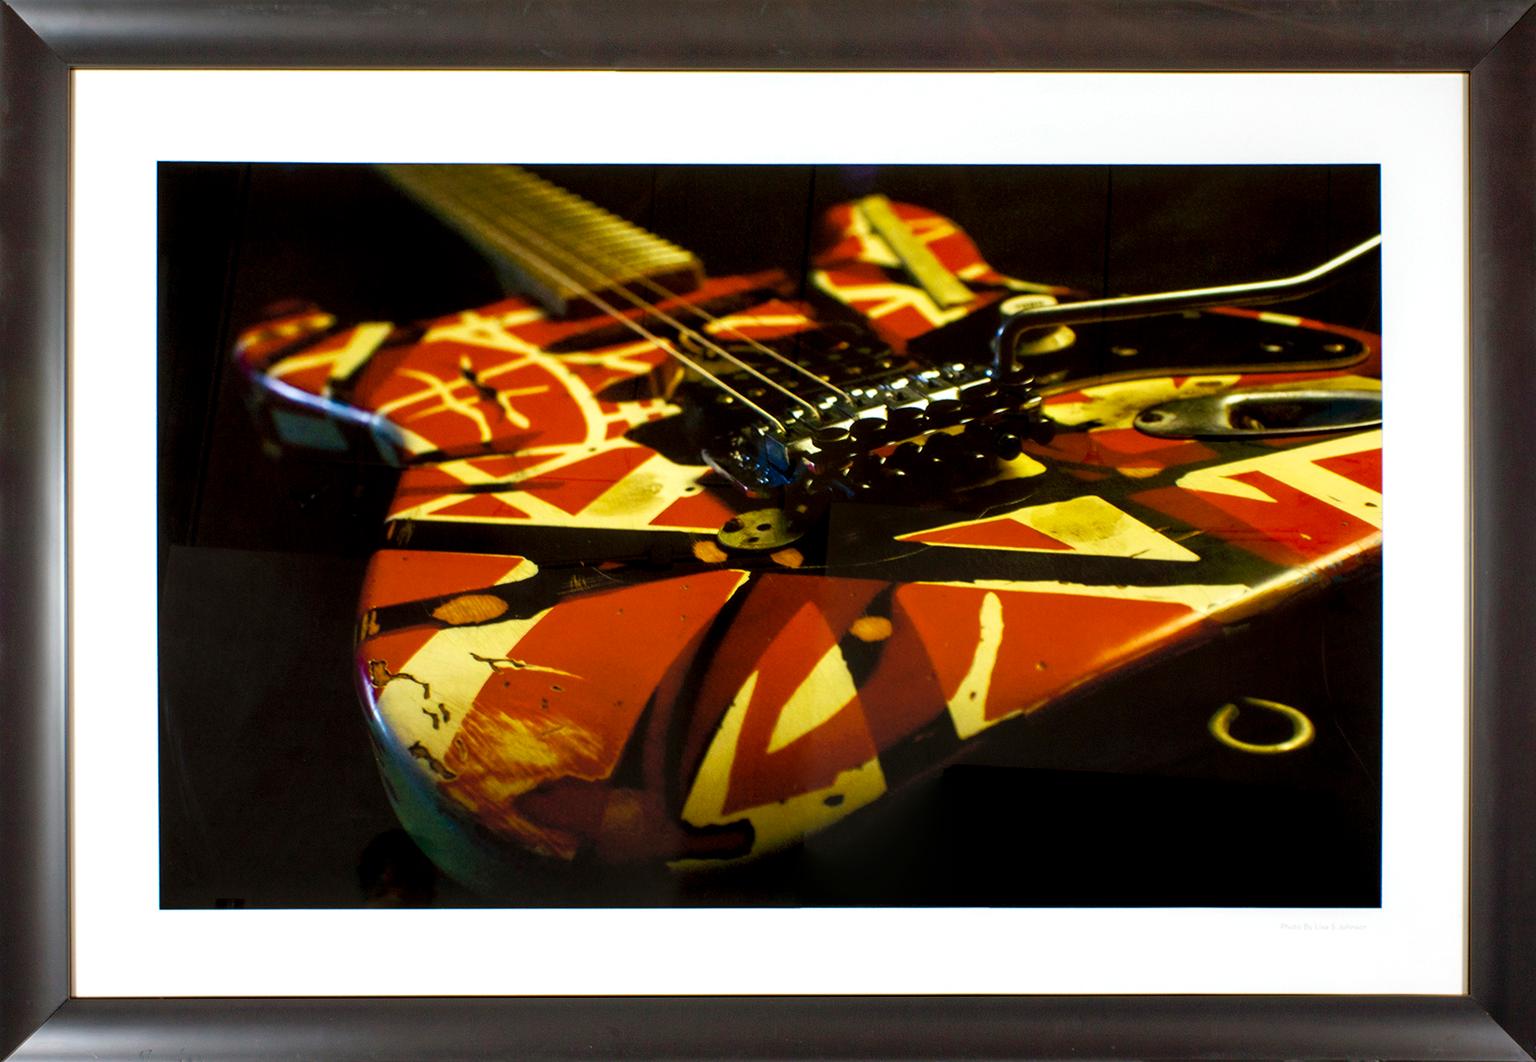 "Eddie Van Halen Frankenstrat Guitar" framed photograph by Lisa S. Preston taken for her book "108 Rock Star Guitars." "Photo by Lisa S. Johnson" printed on front lower right corner. Image size: 31 1/2 x 51 3/4 inches. This photograph was previously